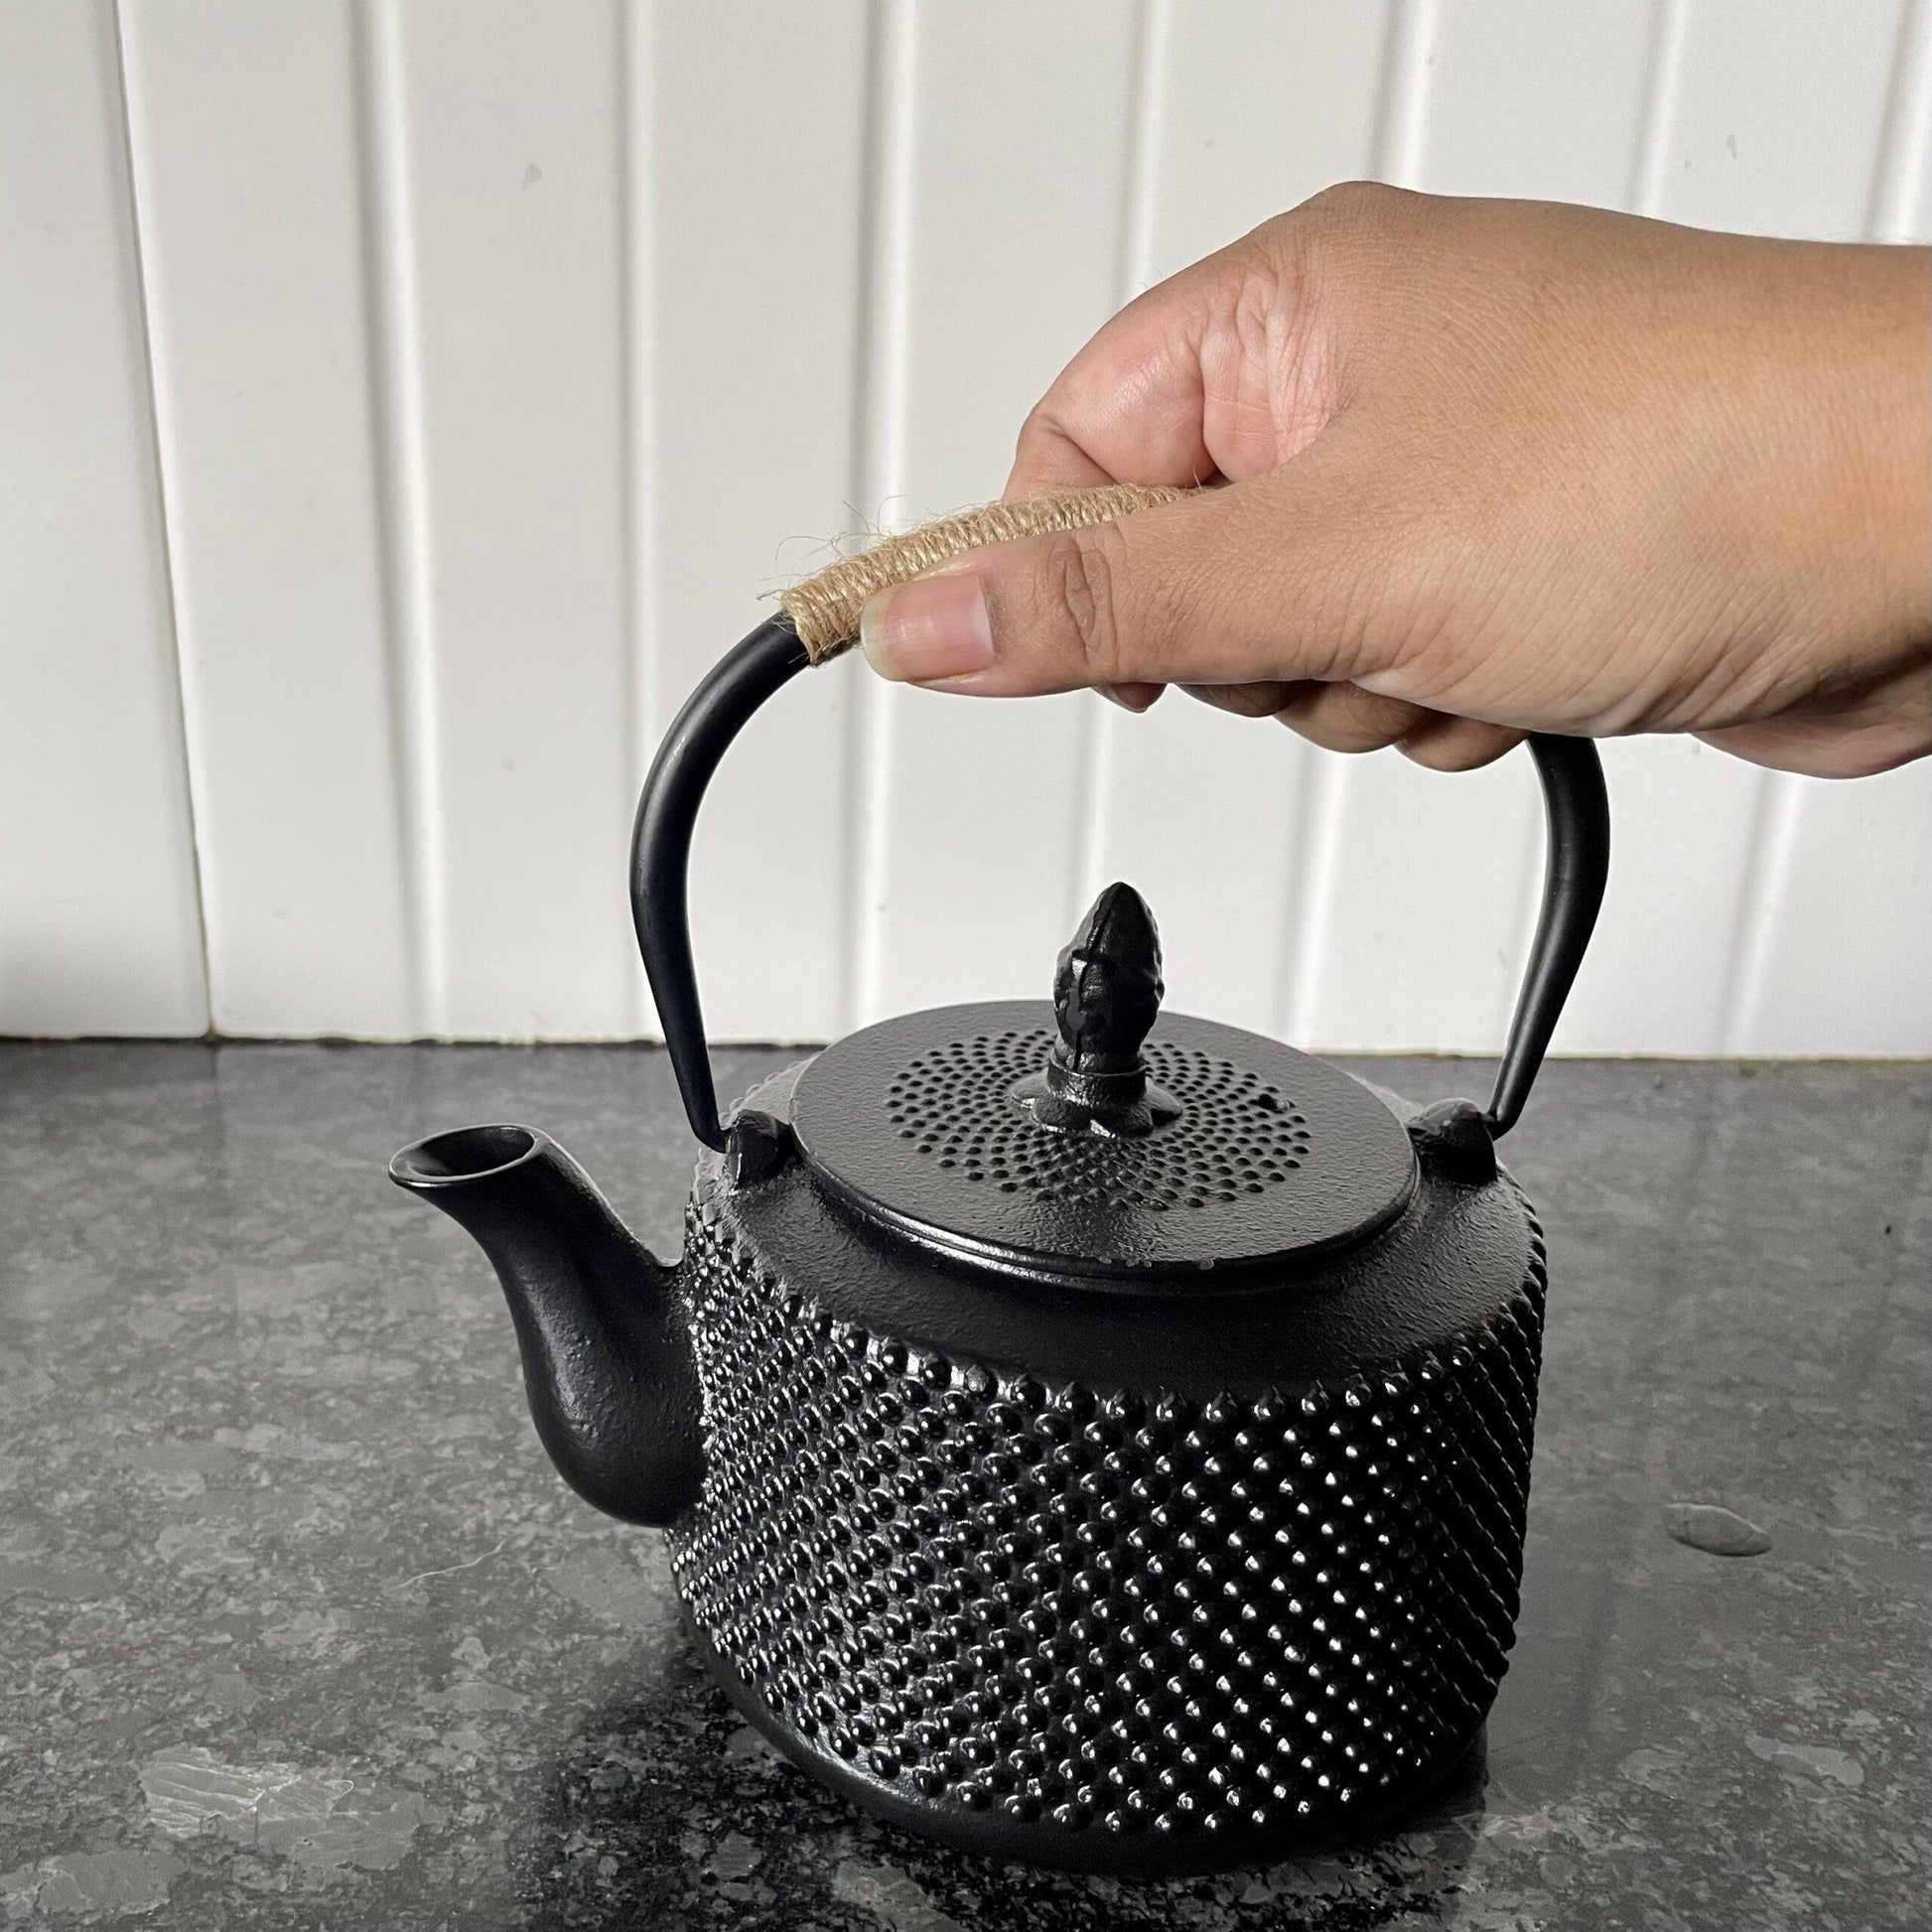 Cast-Iron Hobnail TeaPot - Traditional Japanese Tetsubin (Tetsu-Kyusu Black Arare patterned TeaPot 580ml Lid with Stainless Steel Infuser for Brewing Tea